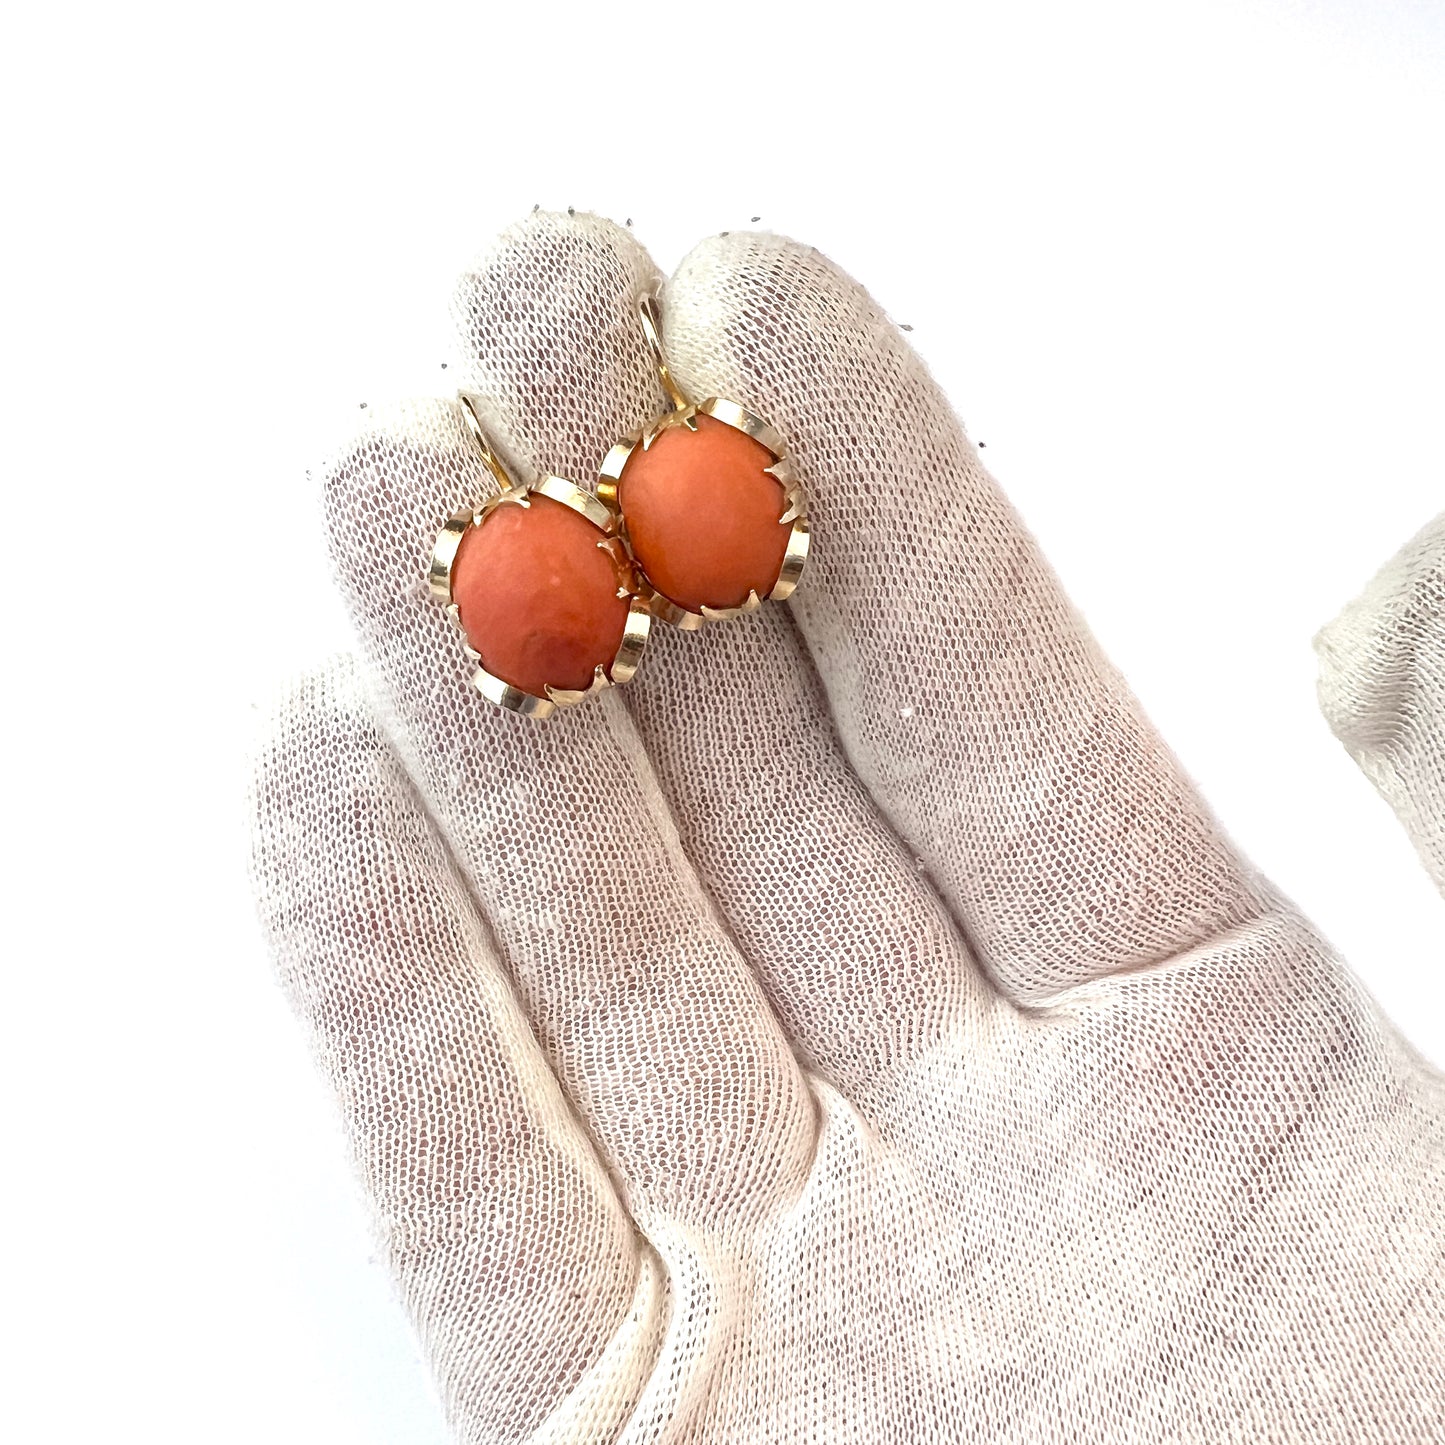 Vintage Mid-century 14k Gold Coral Bold Earrings. Probably Italy. 13.3gram